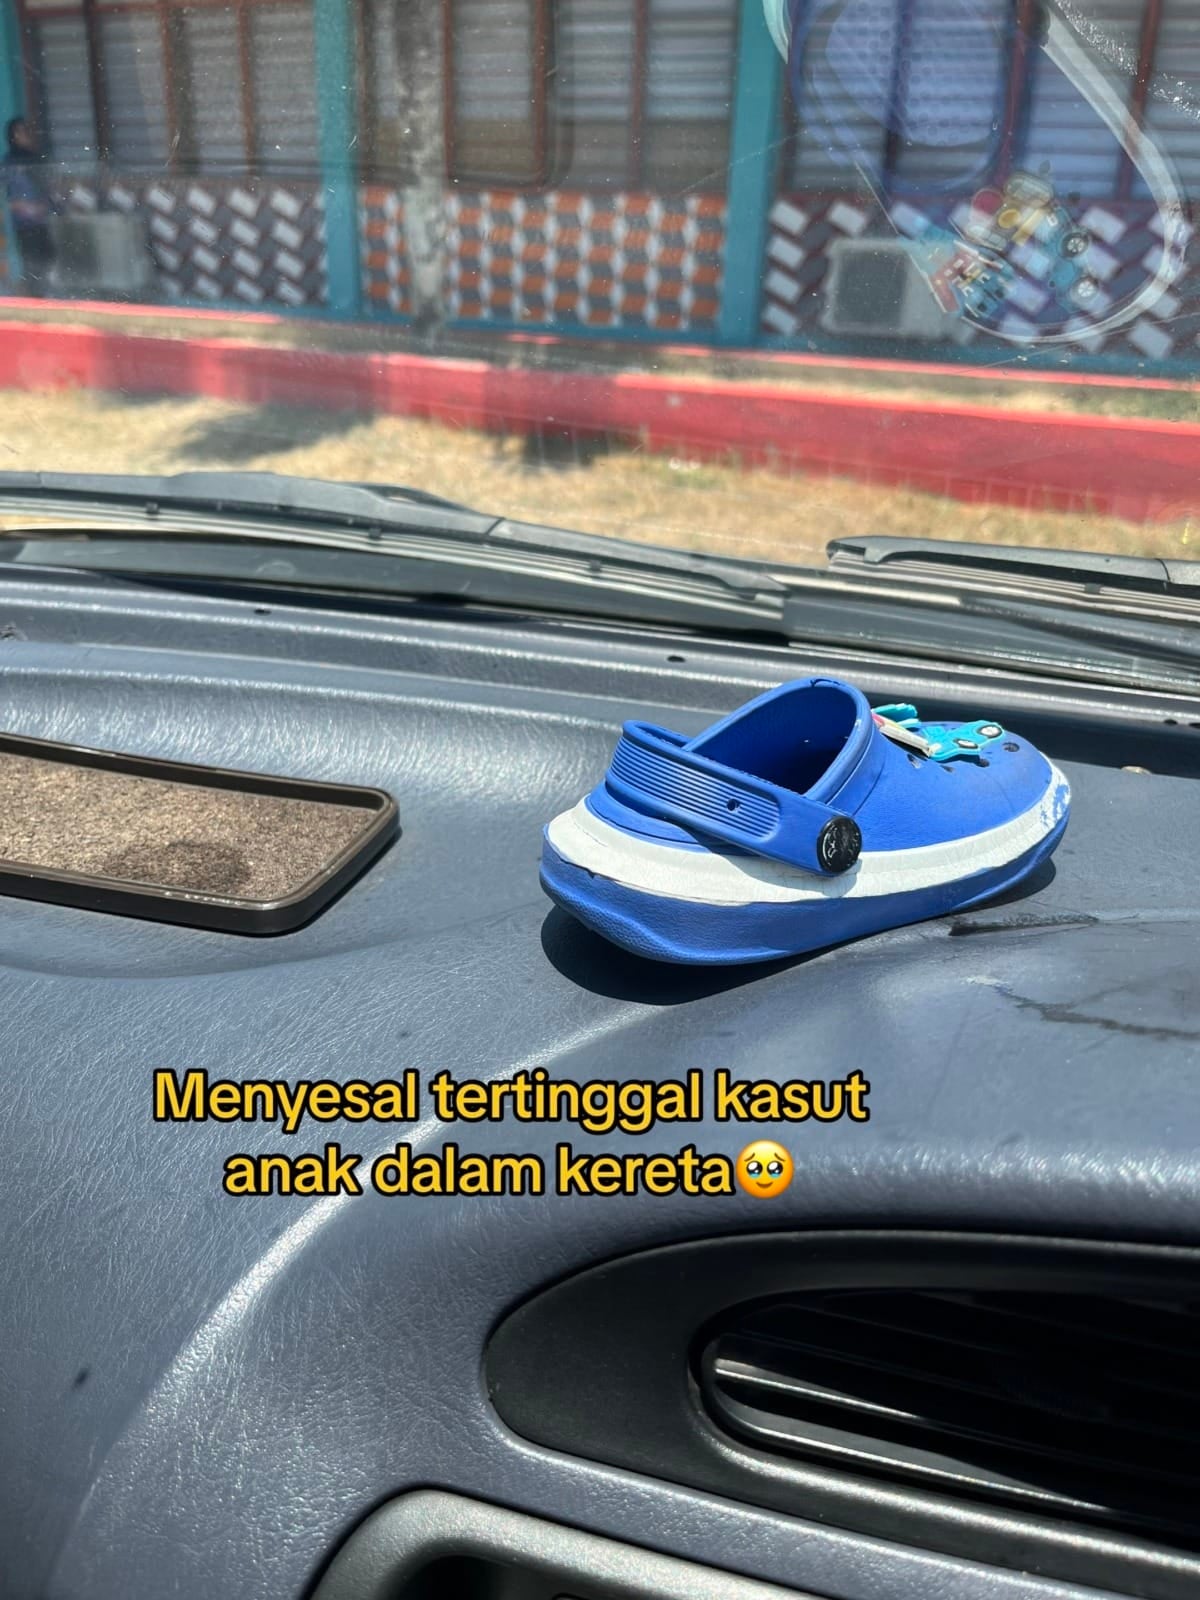 shoes in car1